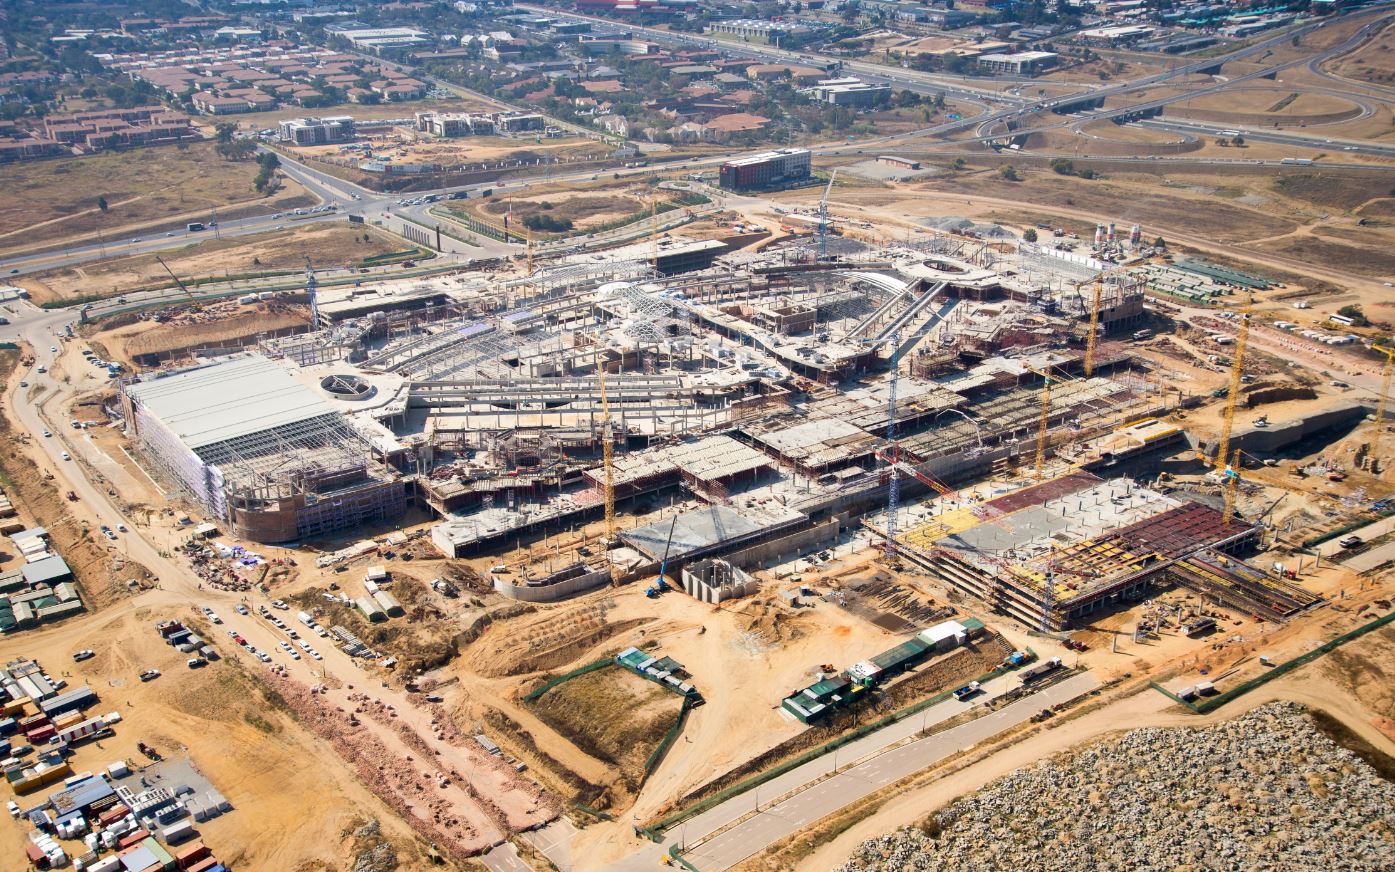 Aerial view of construction site (wbho.co.za)